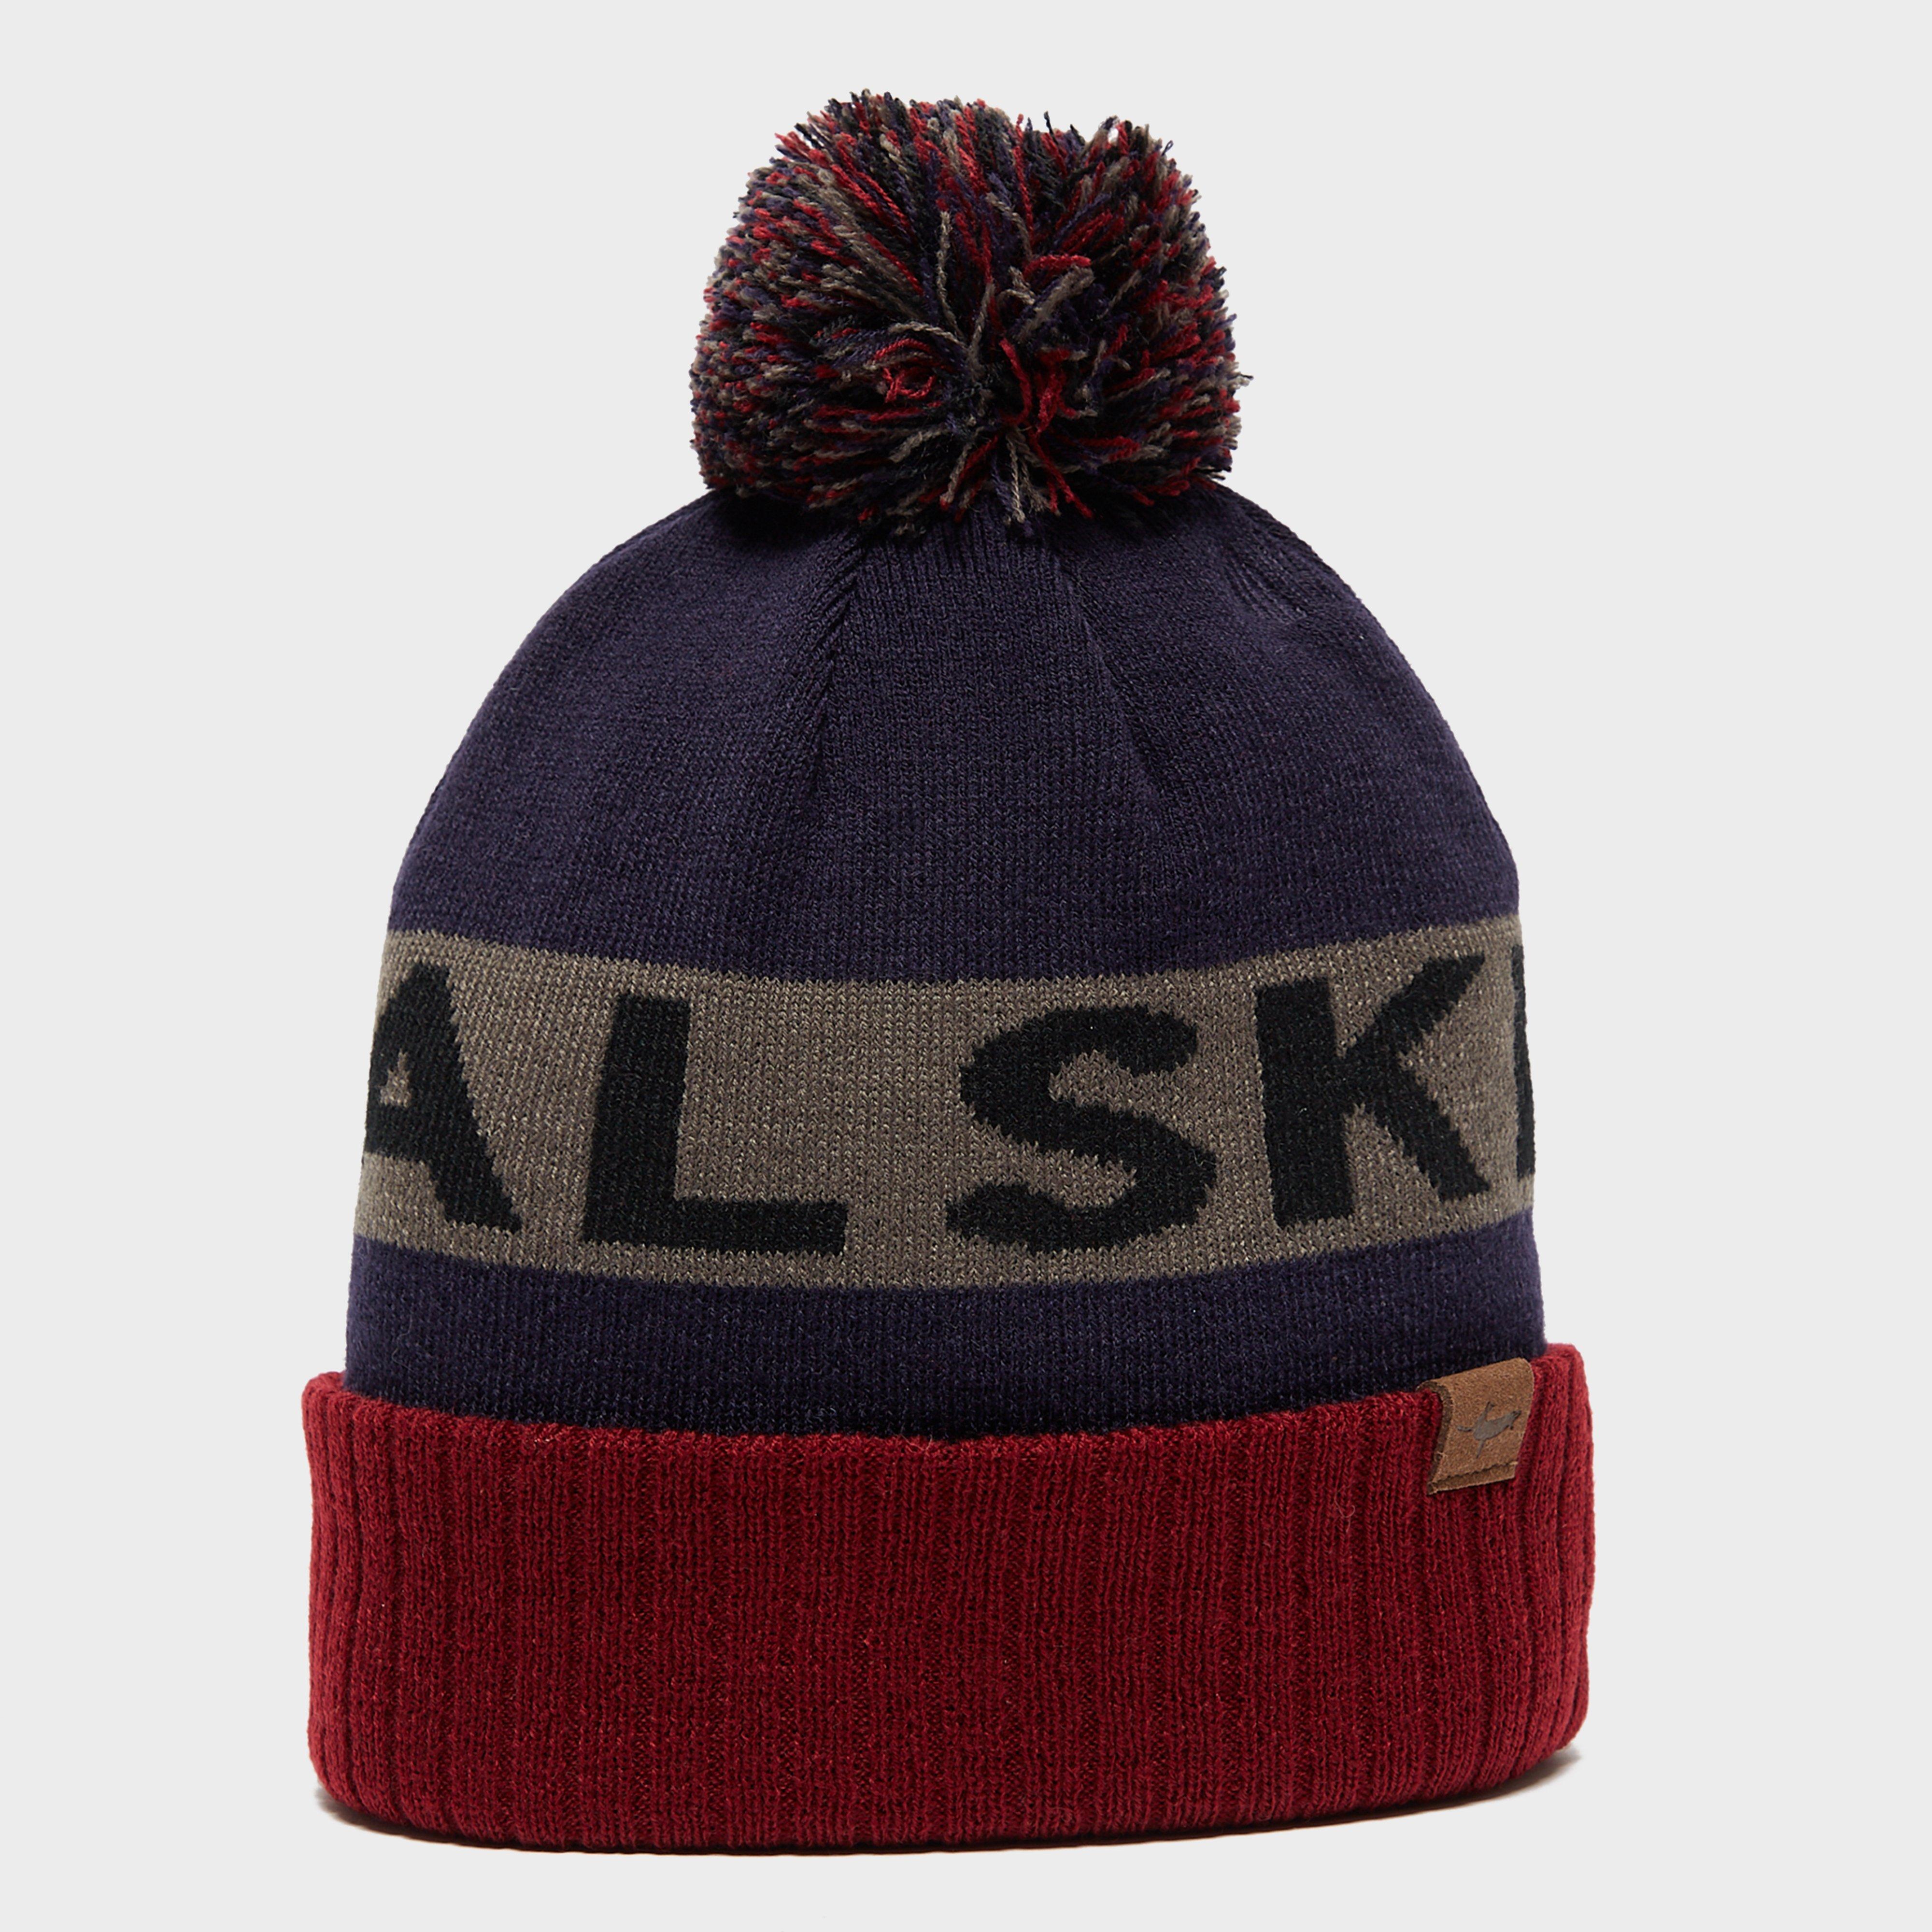 Sealskinz Waterproof Knitted Bobble Hat - Navy/red  Navy/red